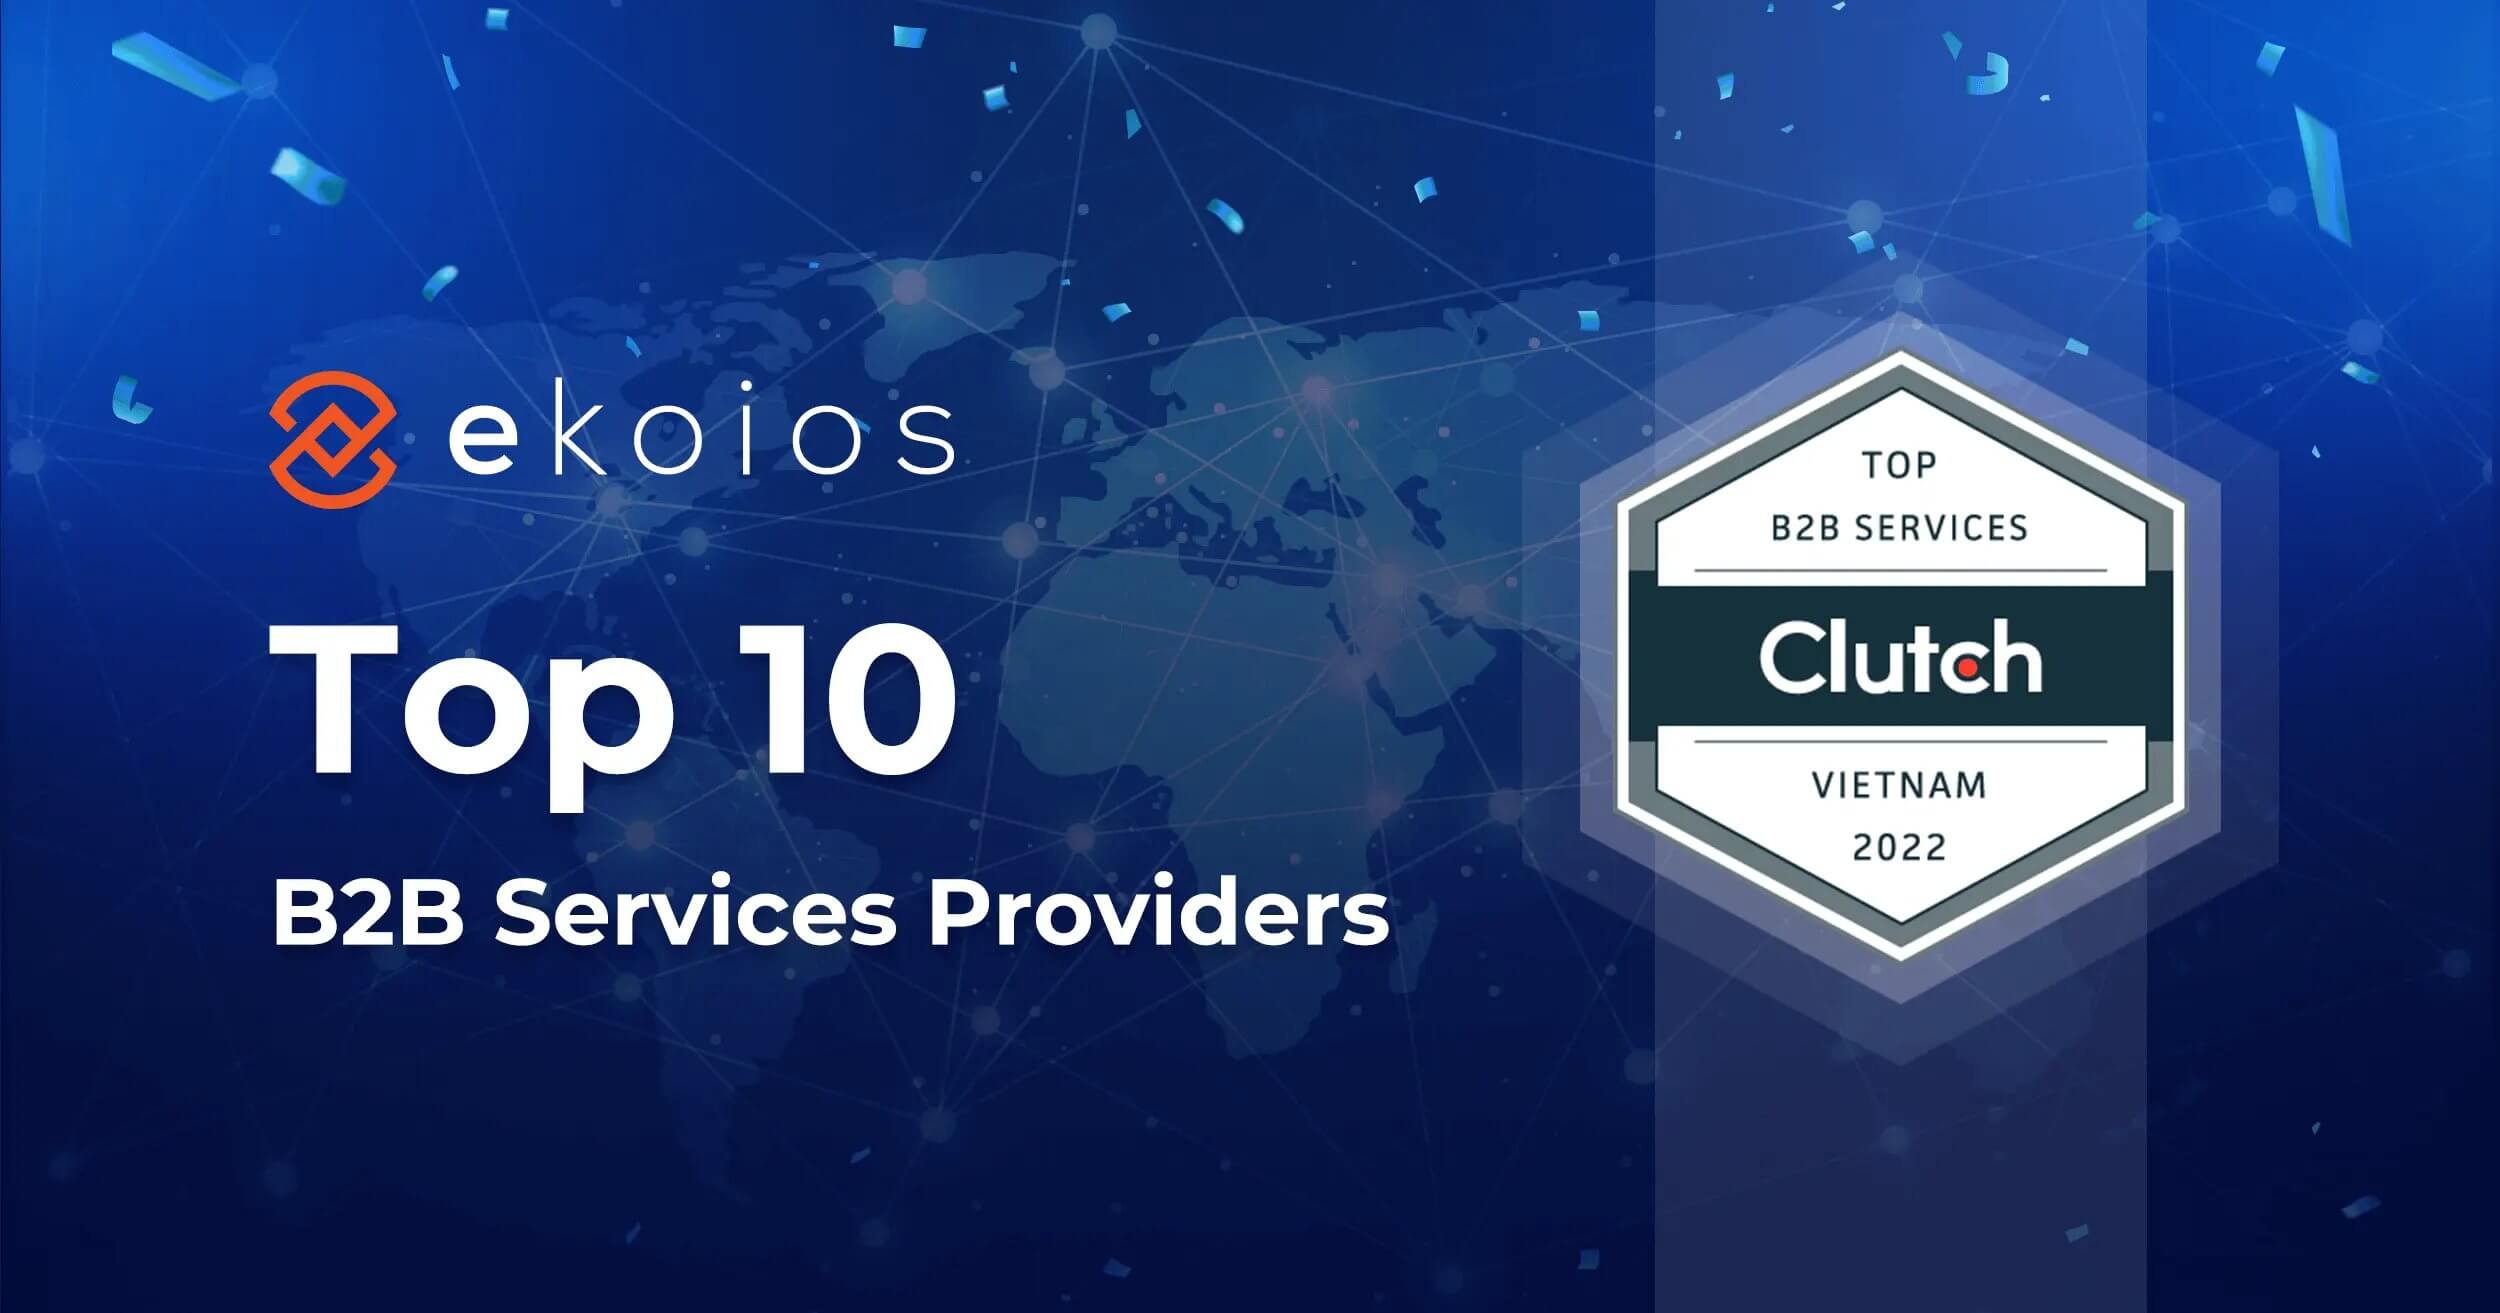 Ekoios awarded as Vietnam&#8217;s top 10 B2B Services Providers in 2022 by Clutch